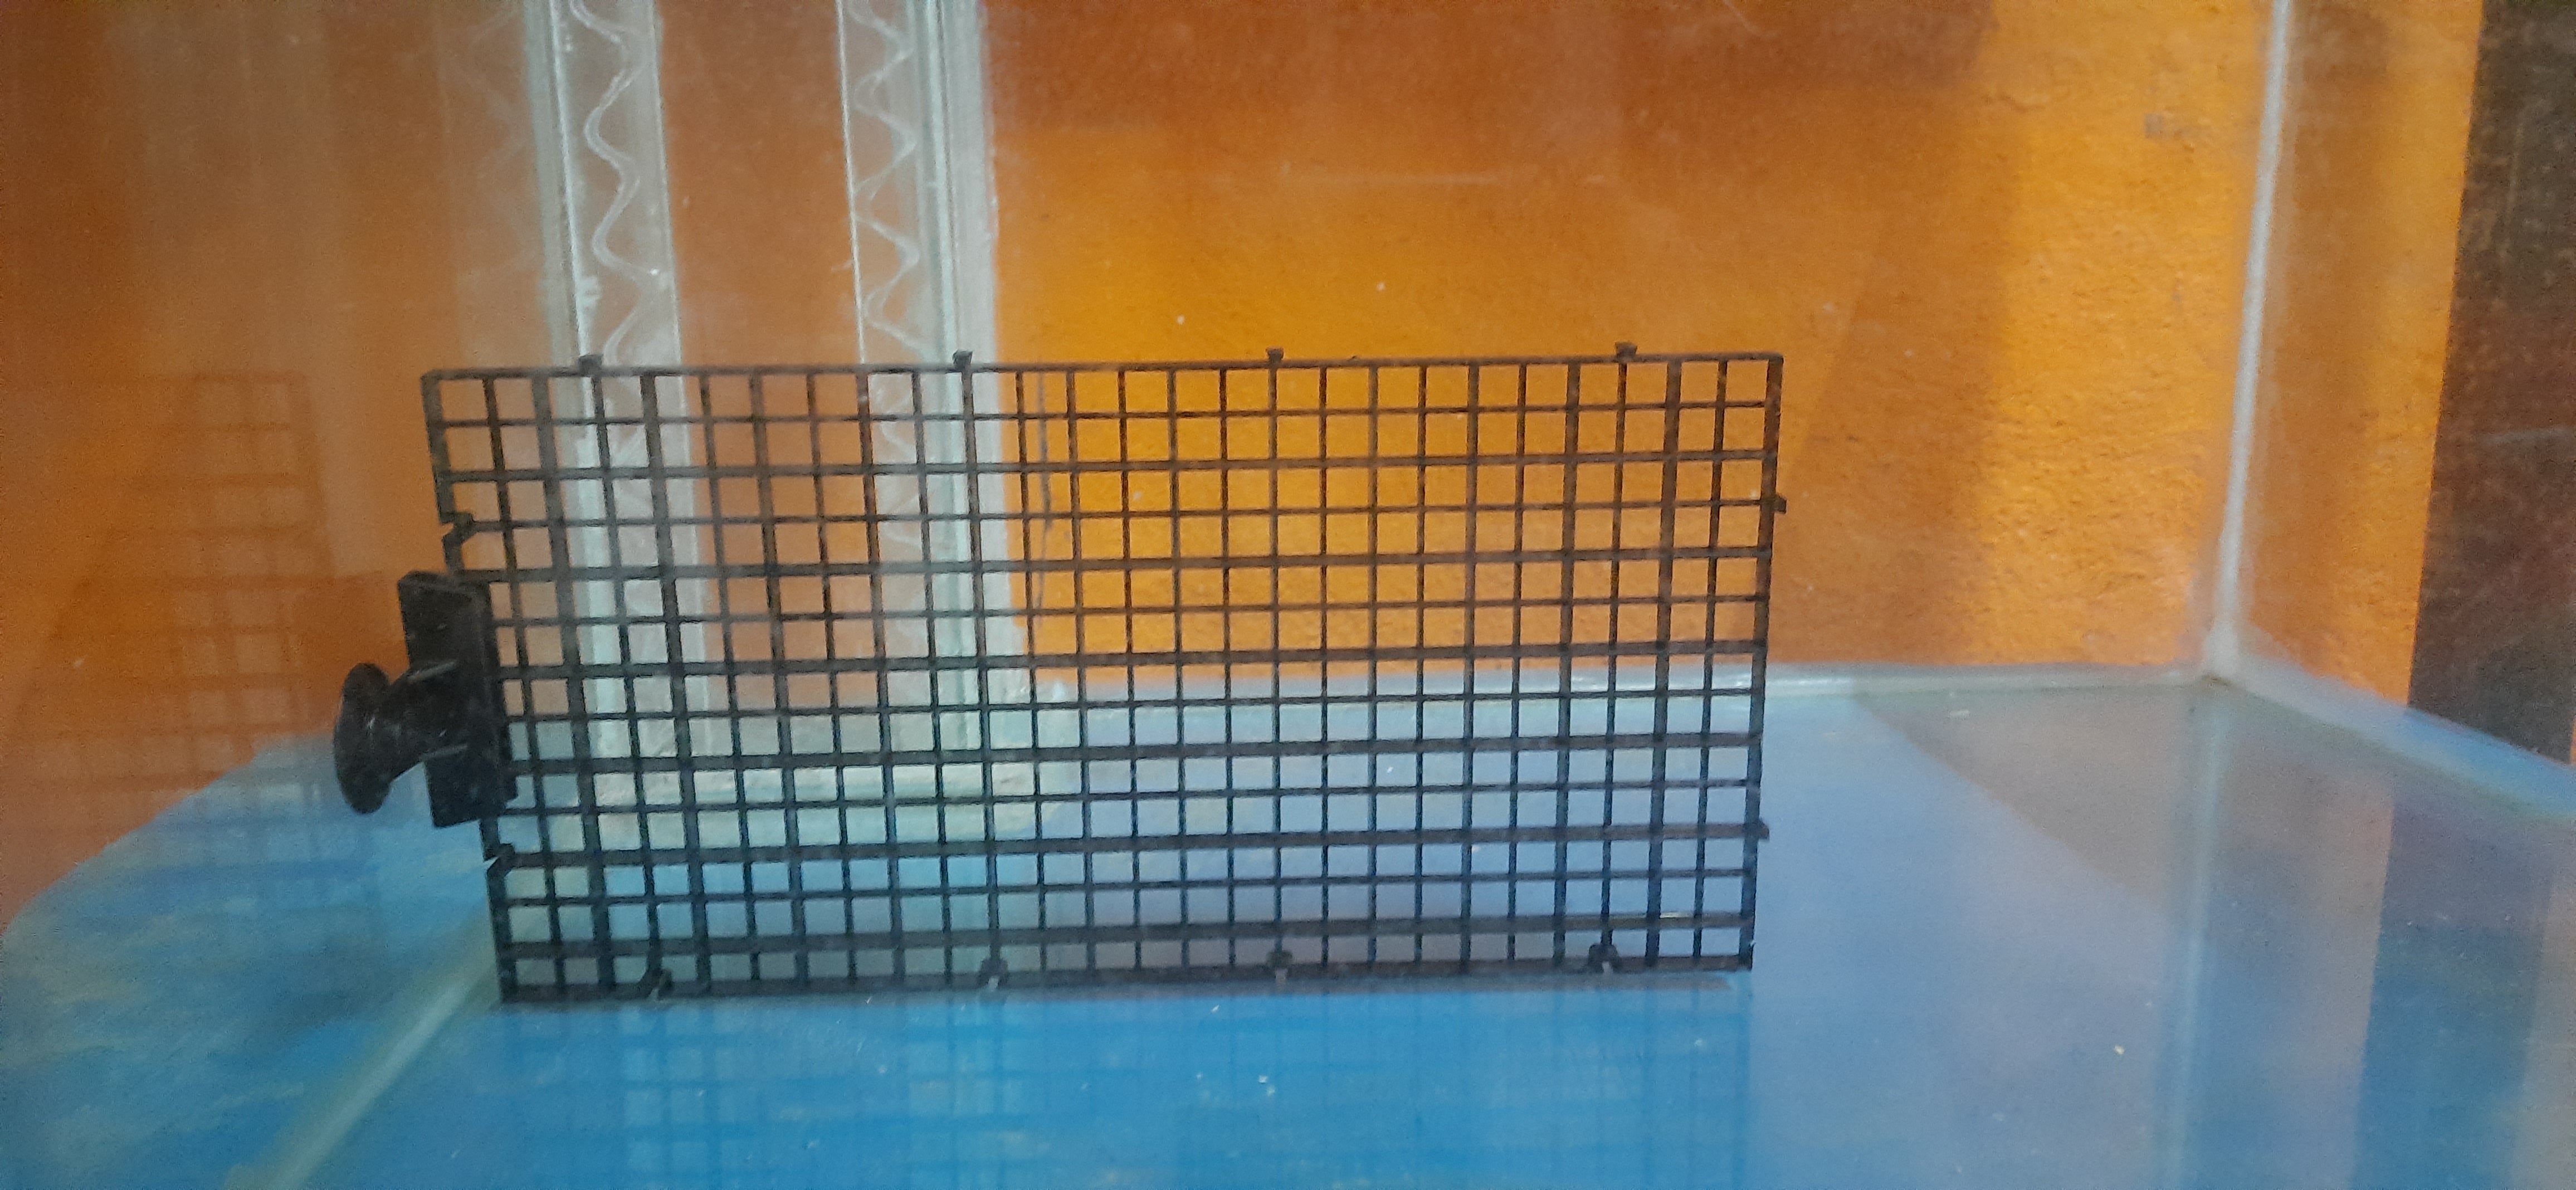 Fish Tank Plastic Grid Divider (Plastic Grid Imported) / Egg Crate Tray